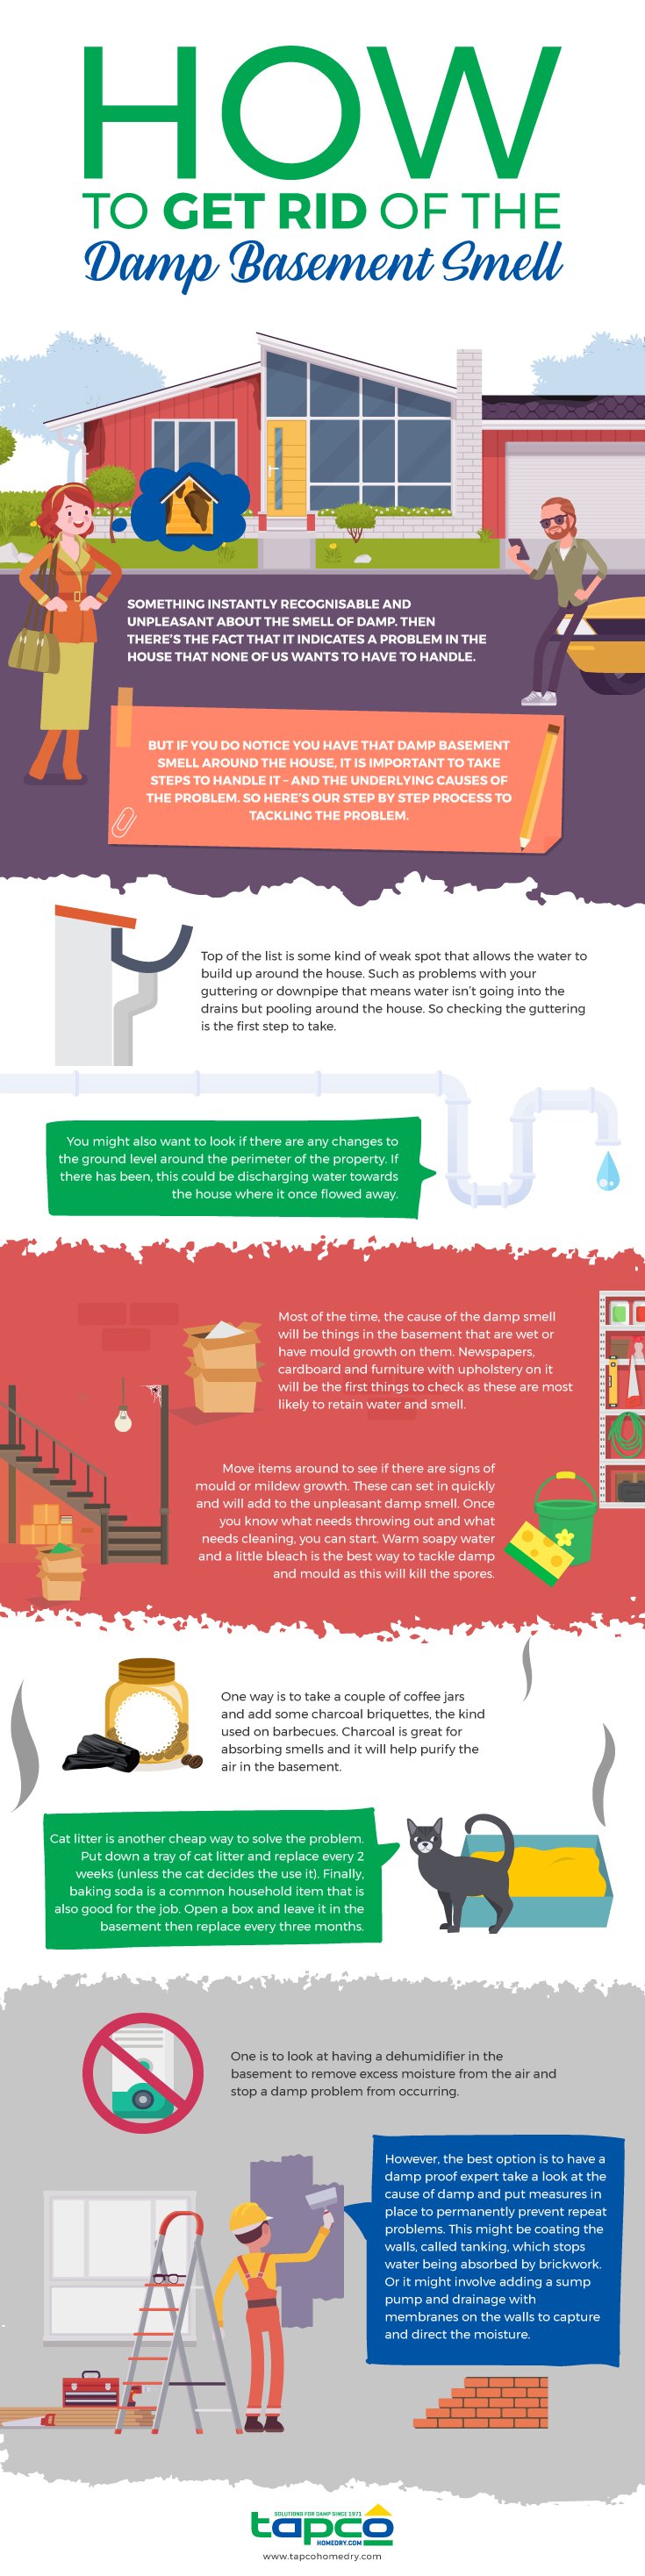 How To Get Rid Of The Damp Basement Smell Infographic